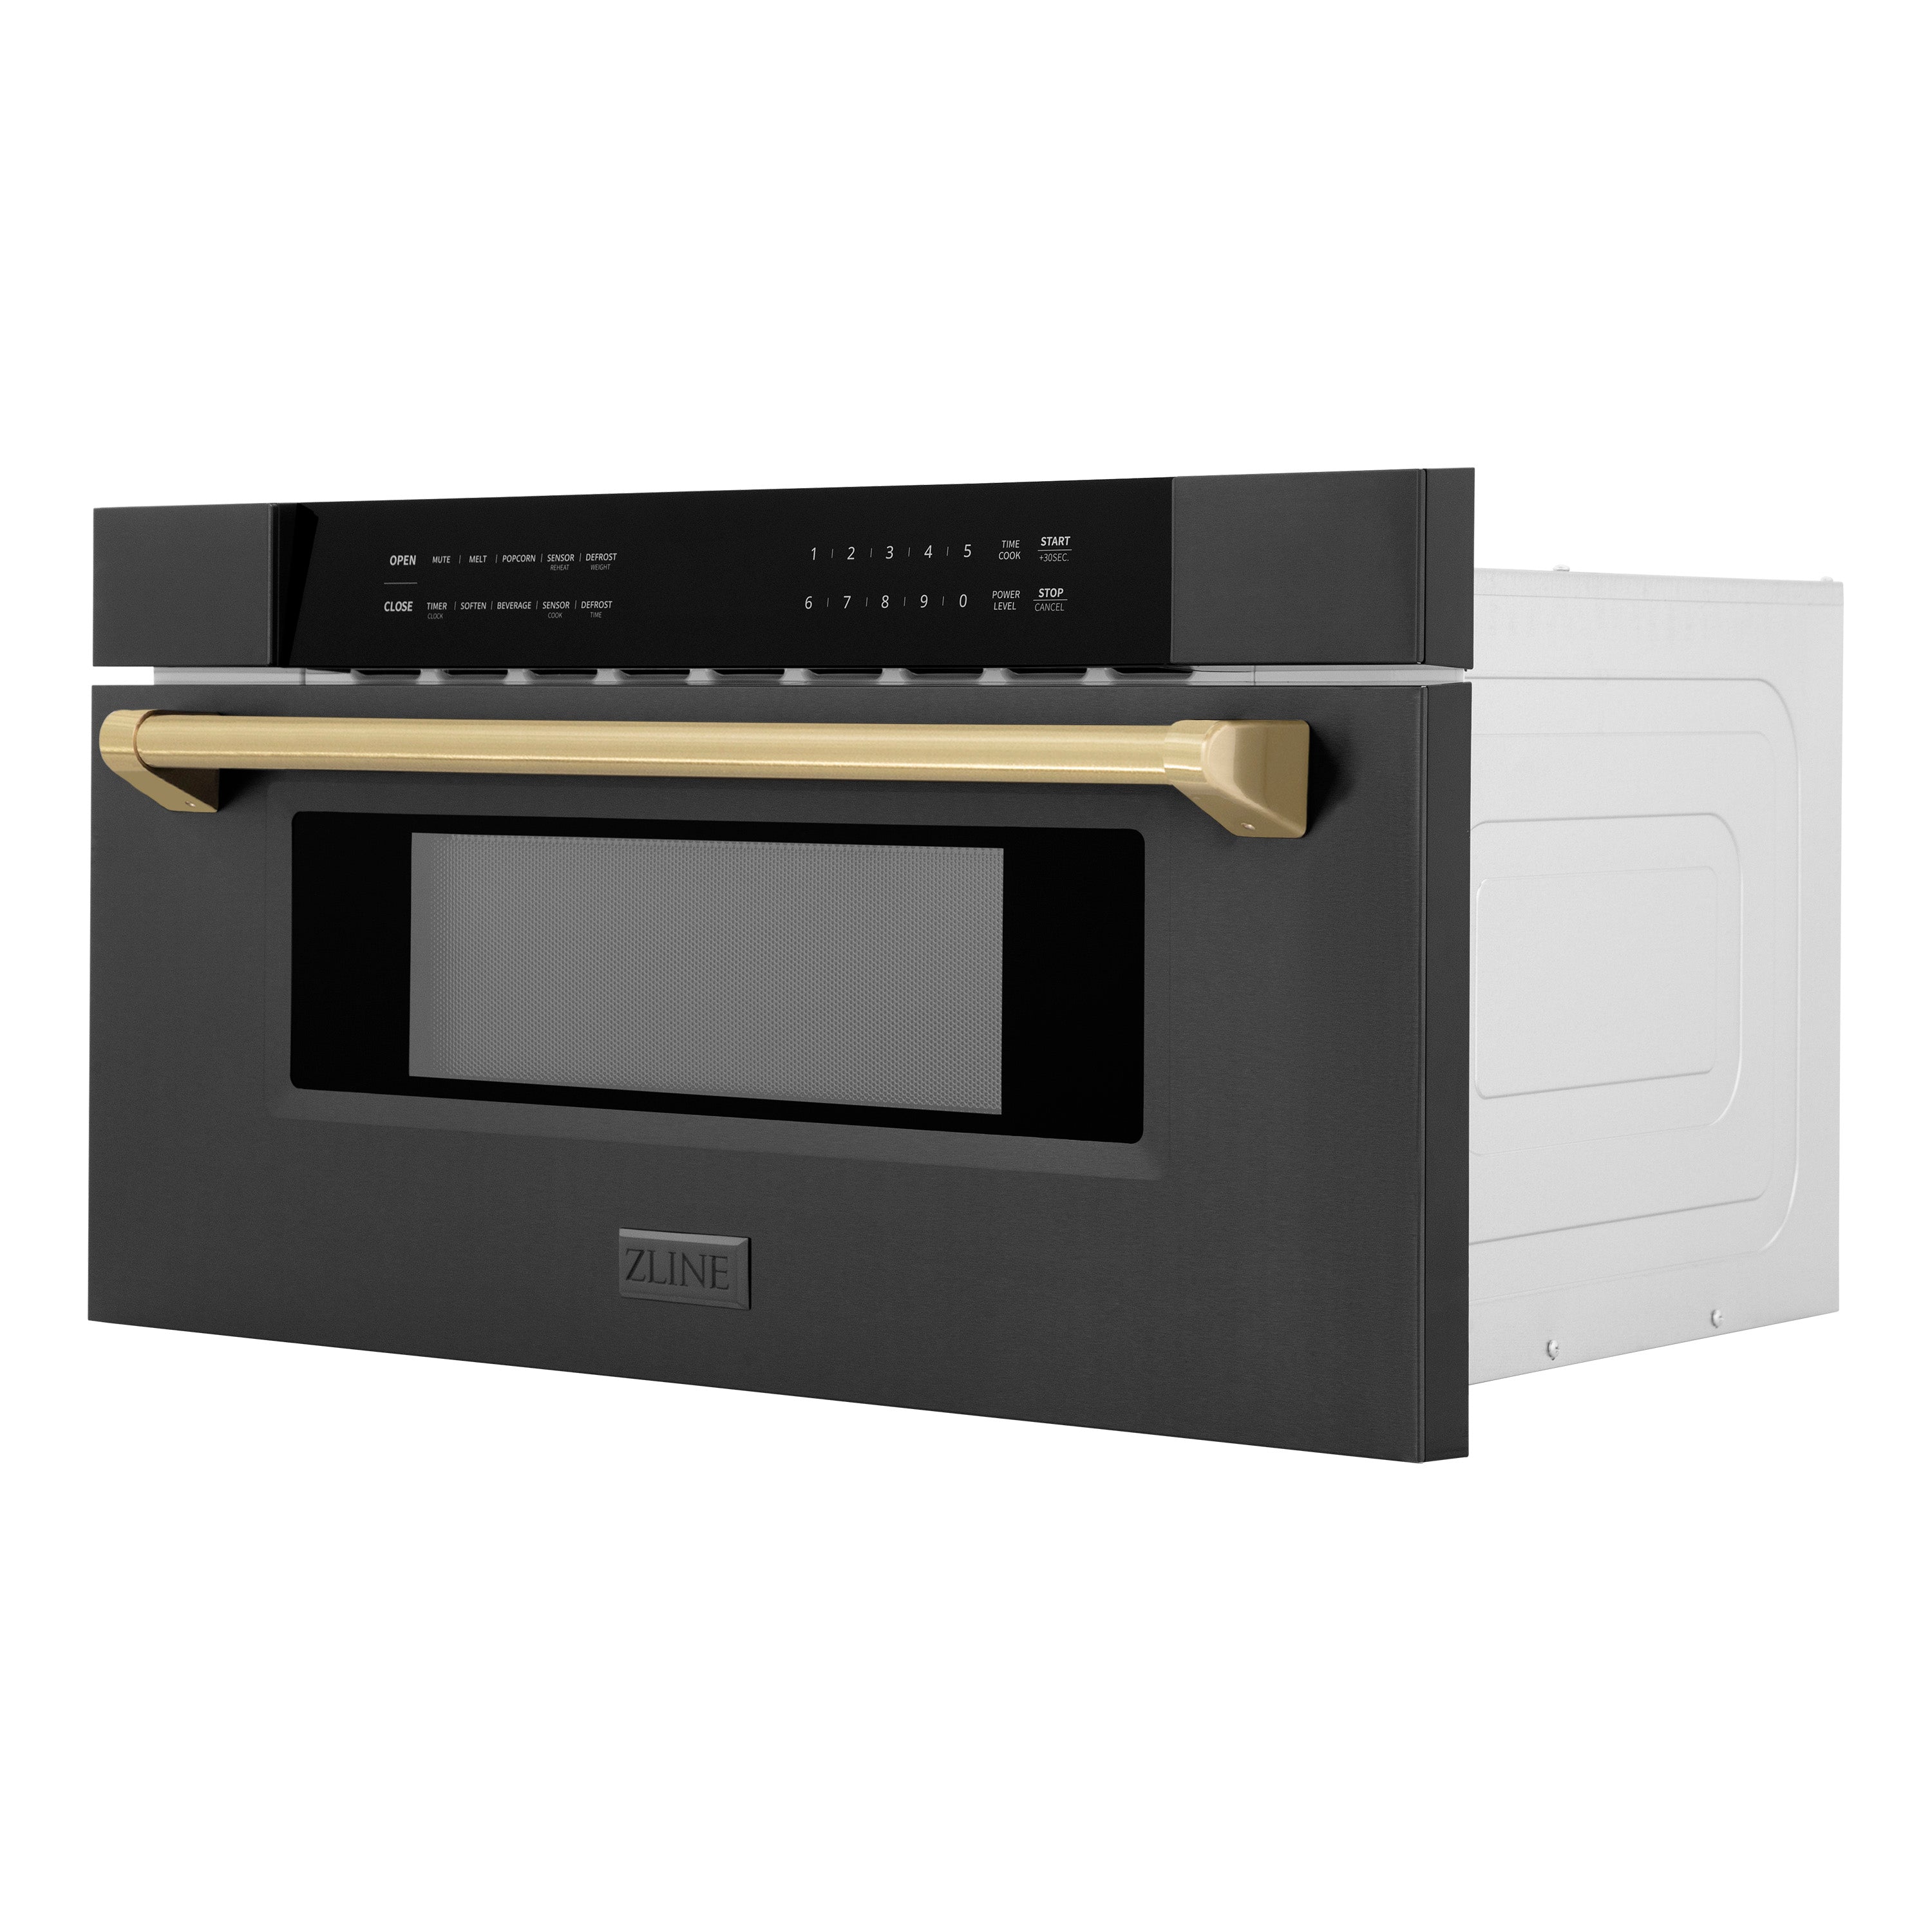 ZLINE Autograph Edition 30 in. 1.2 cu. ft. Built-in Microwave Drawer in Black Stainless Steel with Champagne Bronze Accents (MWDZ-30-BS-CB) Side View Drawer Closed